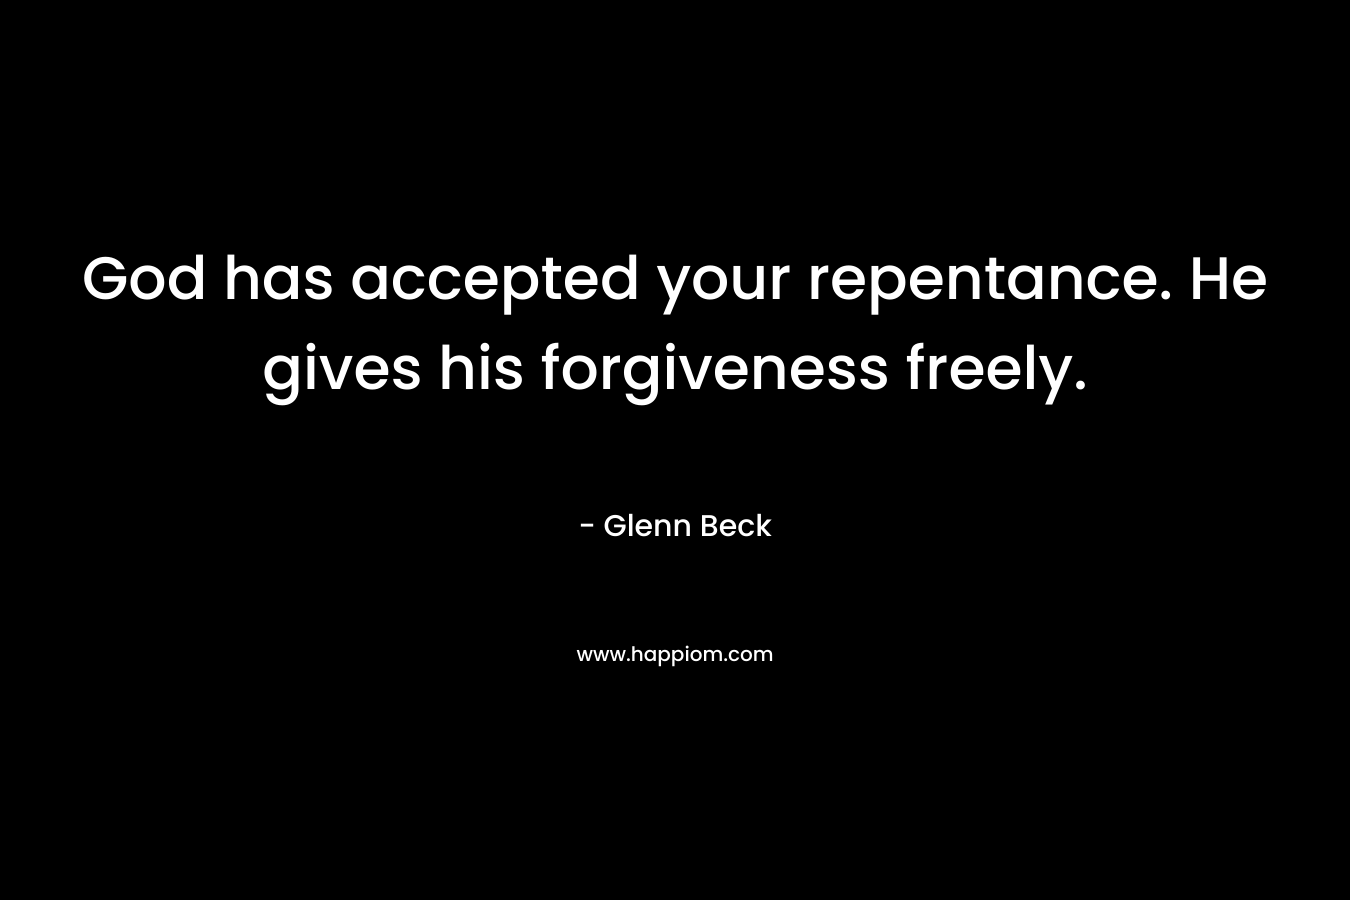 God has accepted your repentance. He gives his forgiveness freely. – Glenn Beck